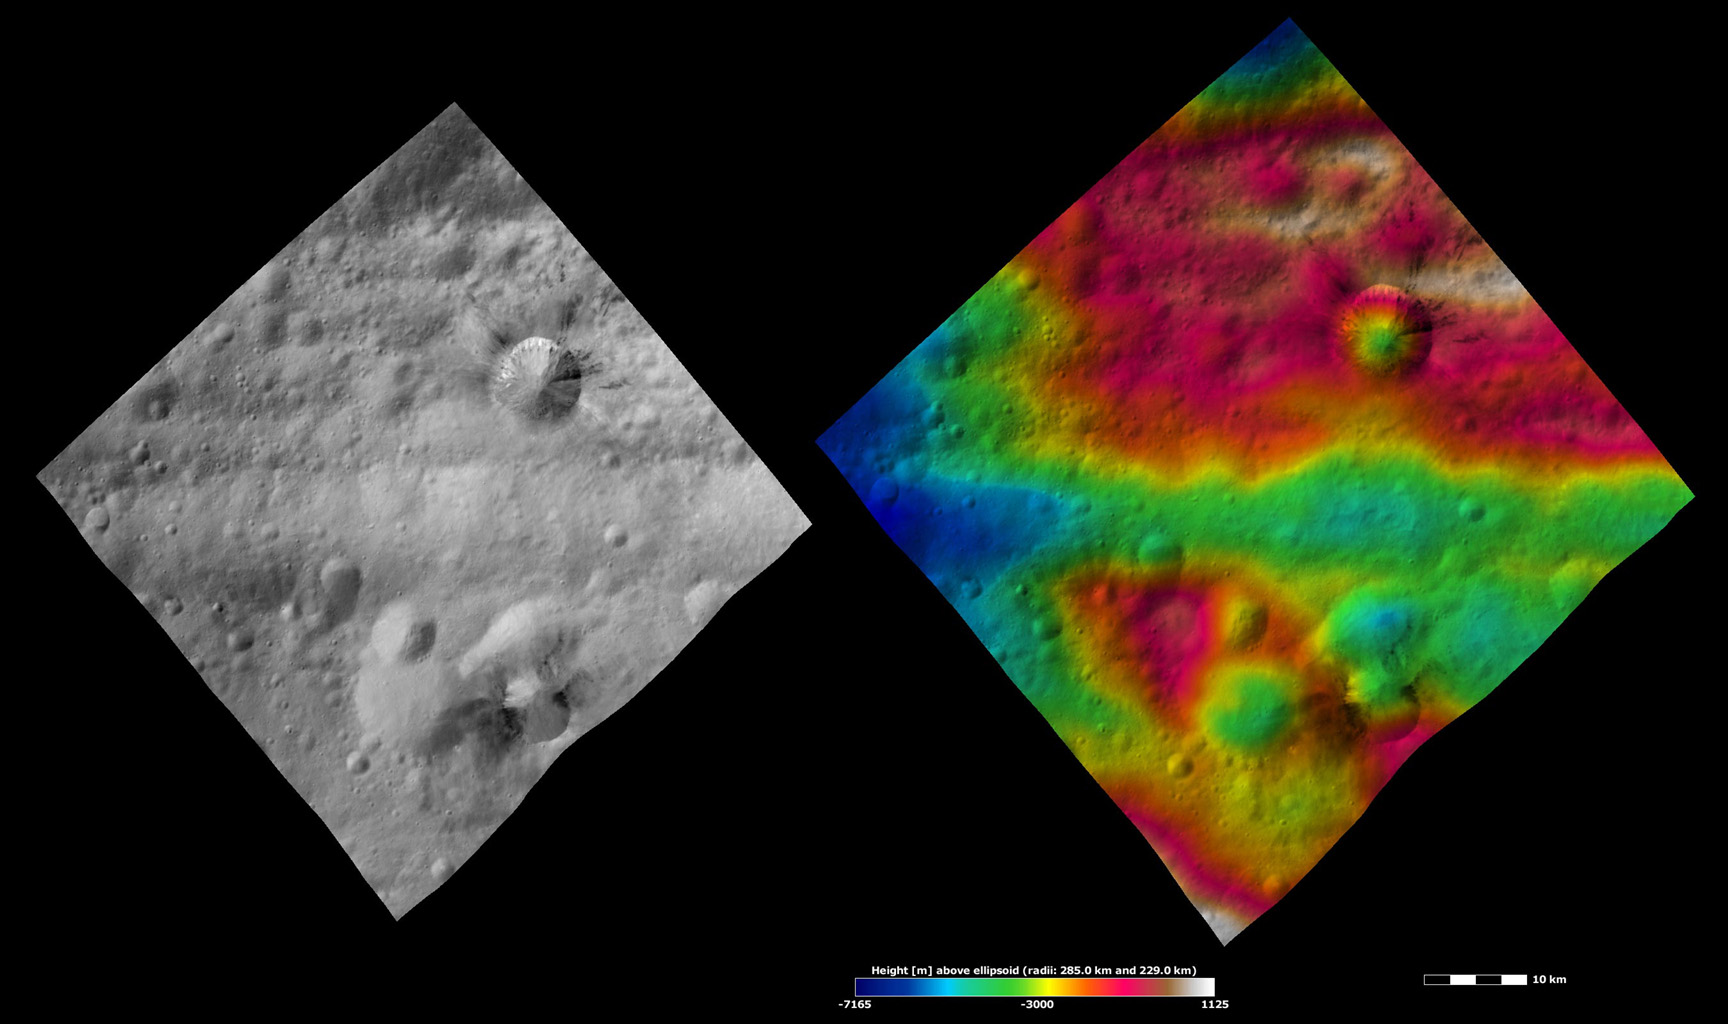 Divalia Fossa and Rubria and Occia Craters, Apparent Brightness and Topography Images